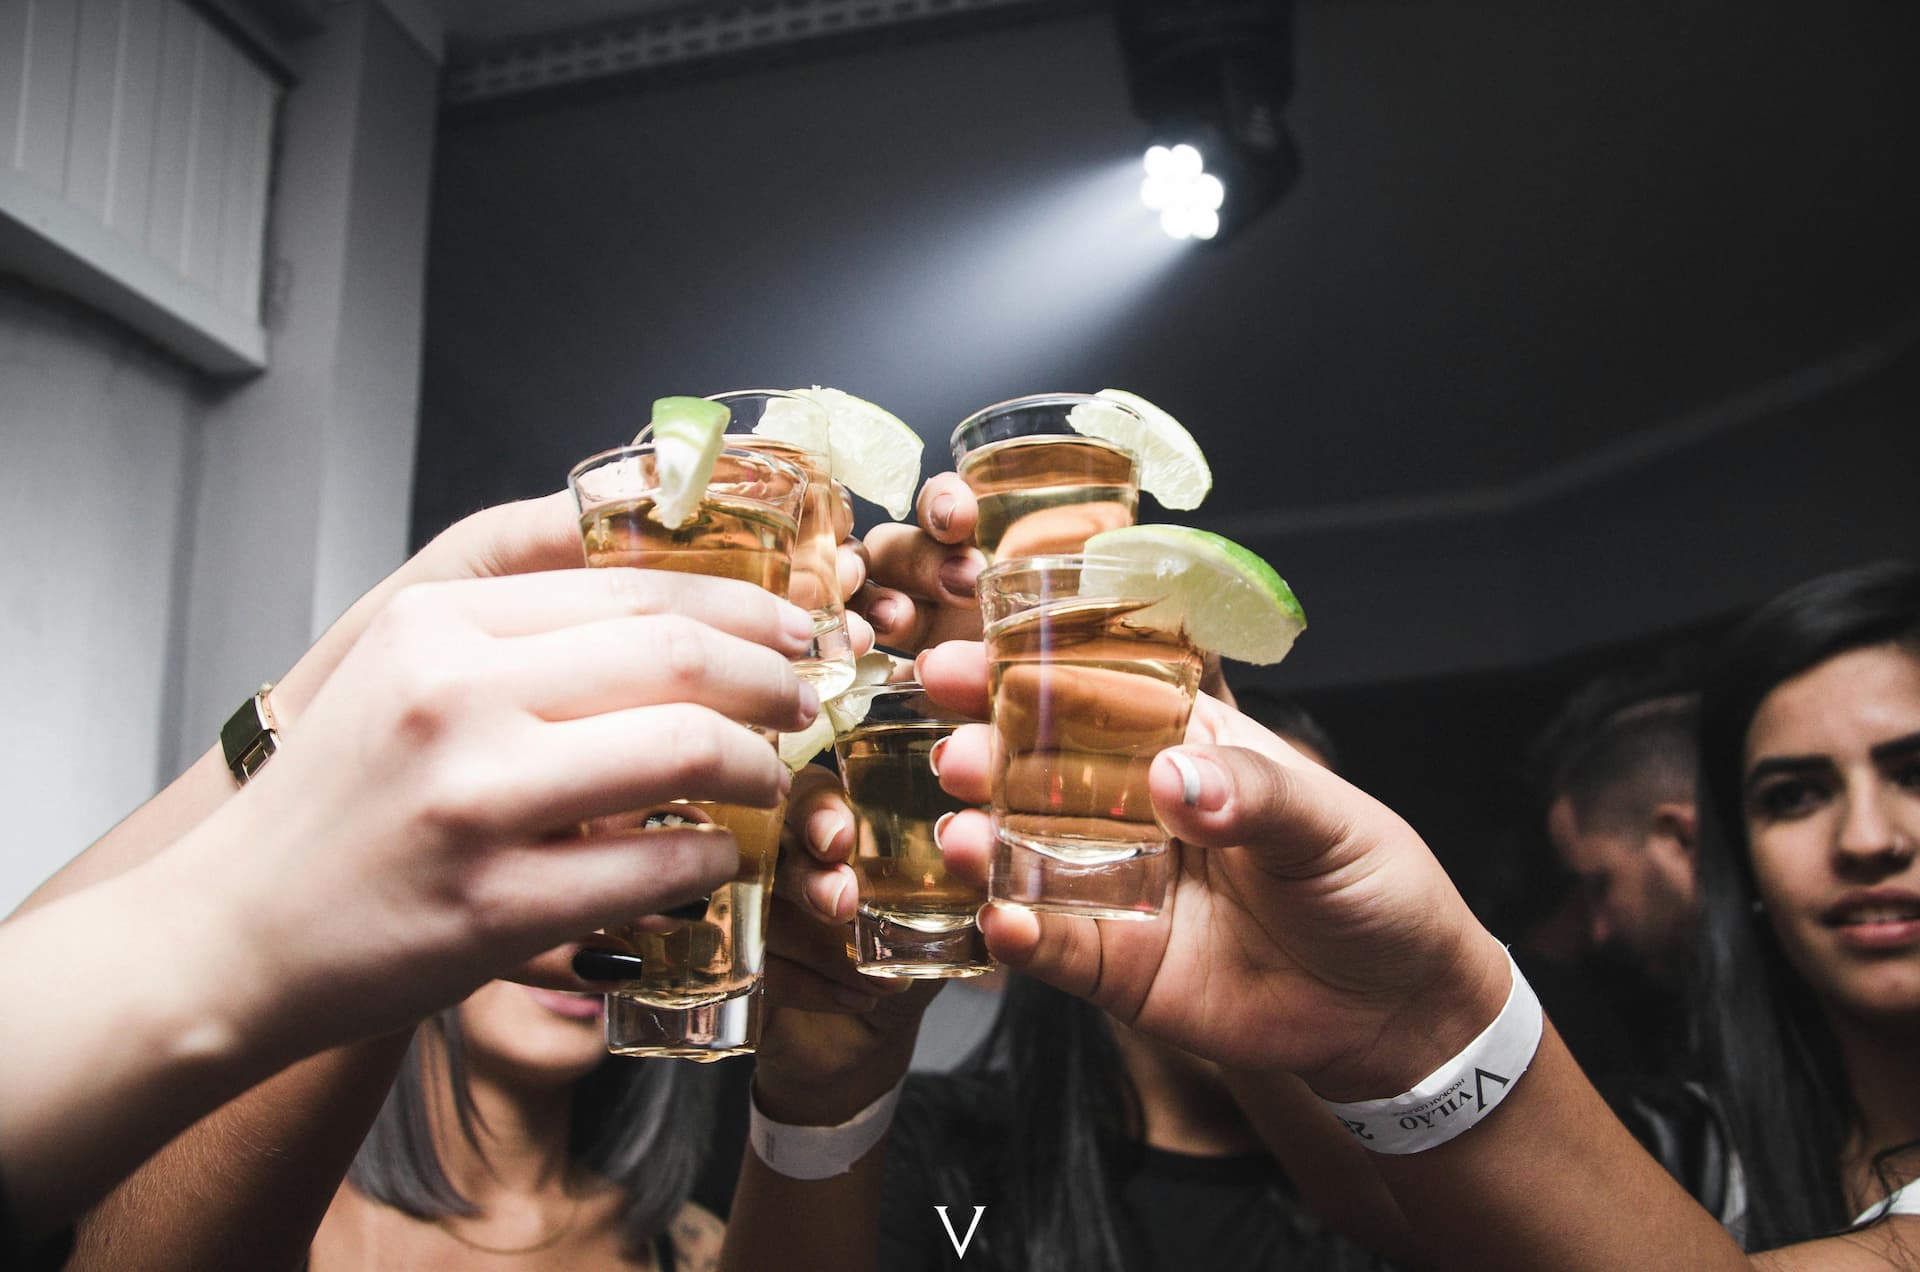 Nightlife Etiquette 101: Here Are The Dos and Don'ts for a Great Night Out!